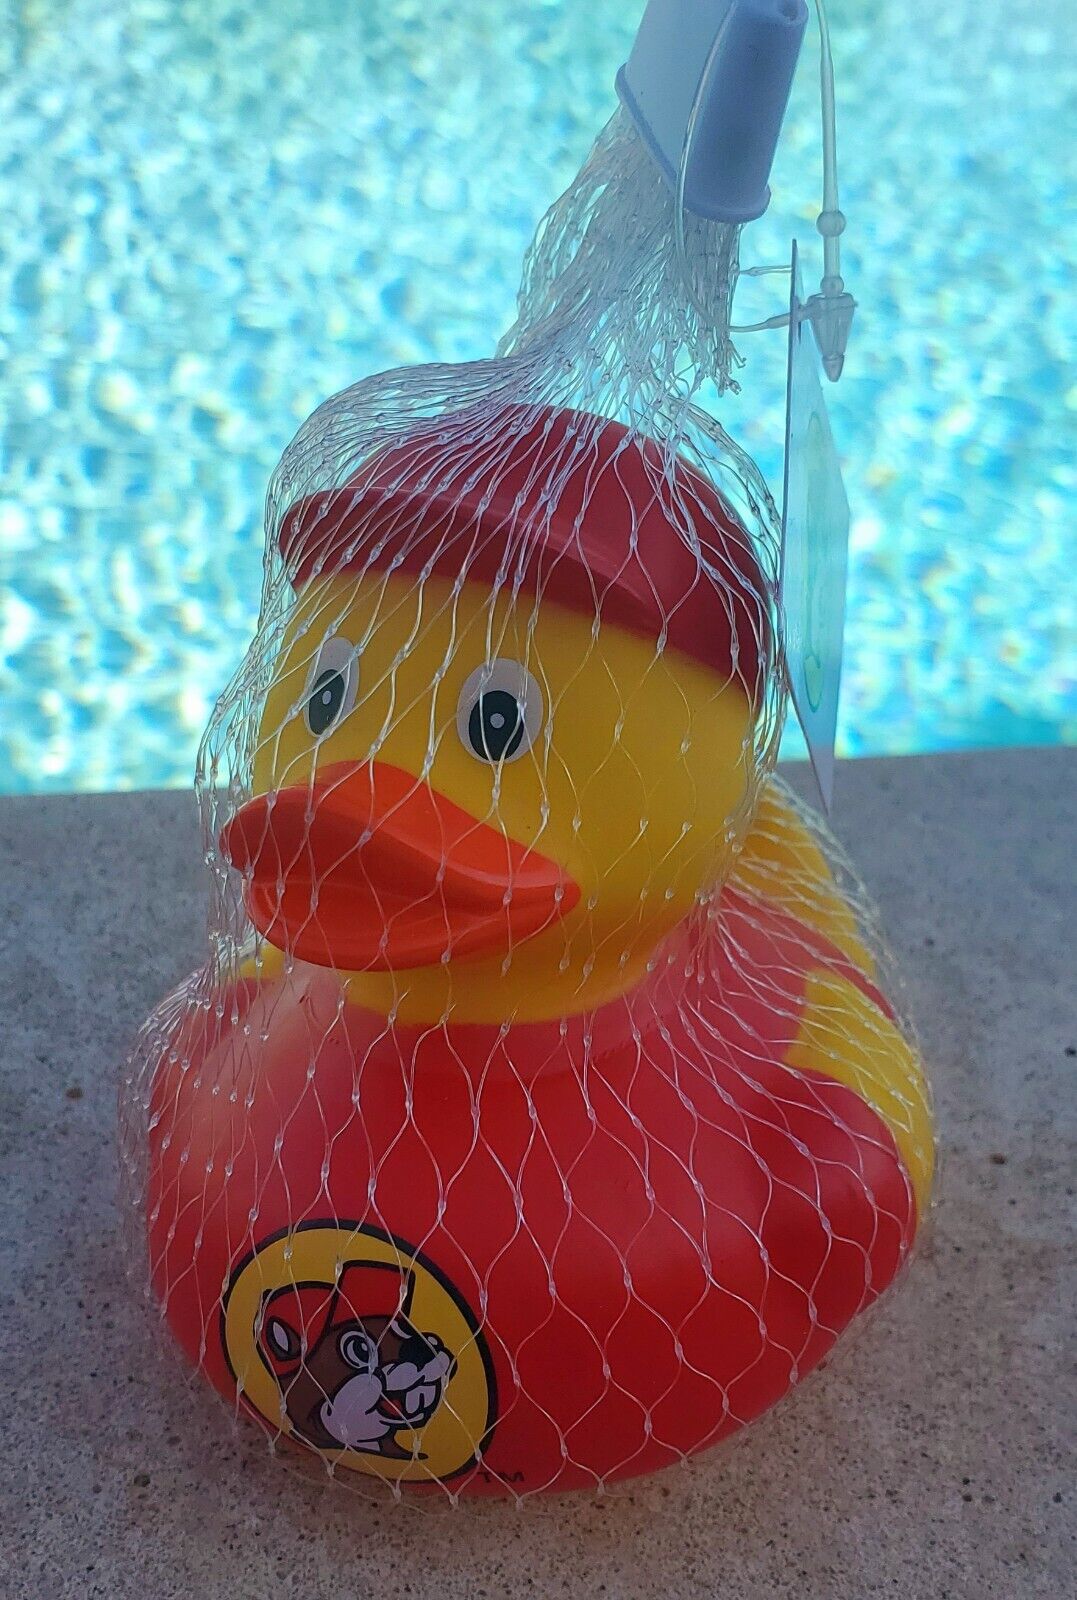 New BUC-EE\'S Beaver Red Cap Rubber Ducky~Duck me my Ducking Acts of Kindness :)